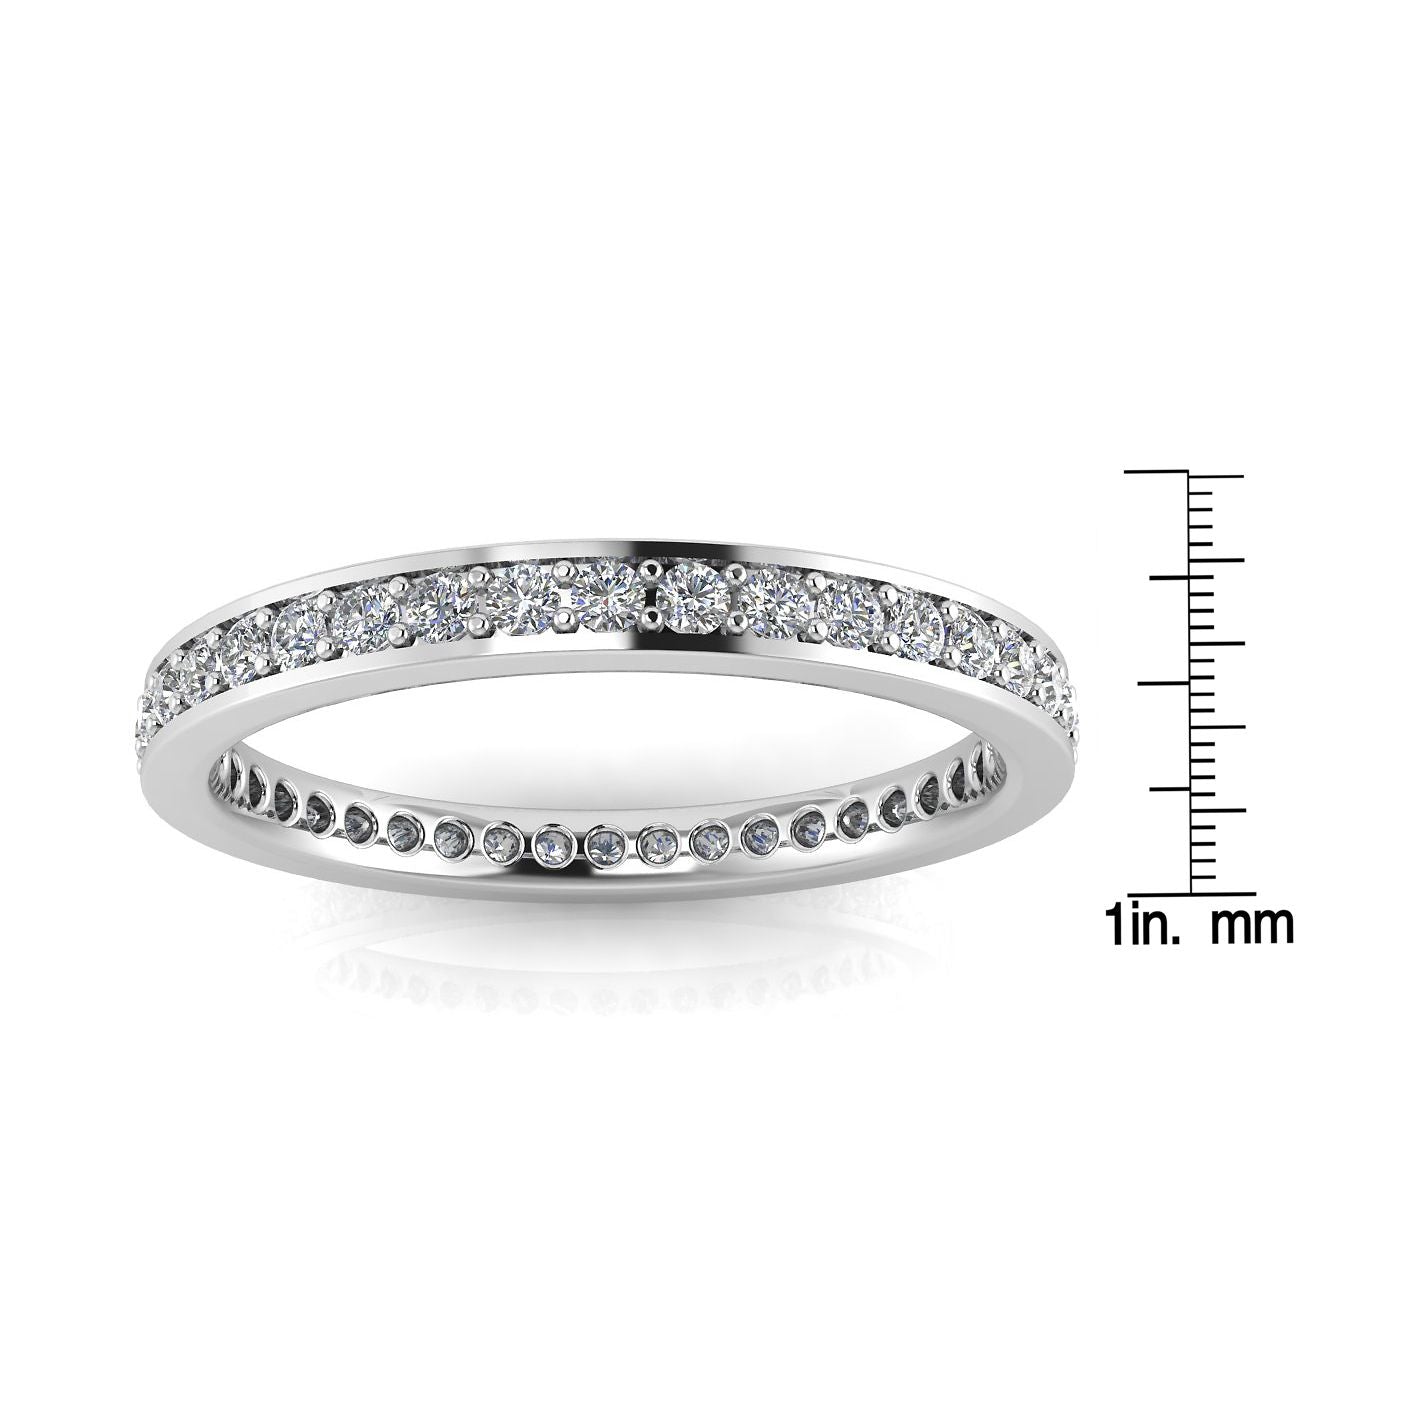 Round Brilliant Cut Diamond Channel Pave Set Eternity Ring In 14k White Gold  (0.5ct. Tw.) Ring Size 8